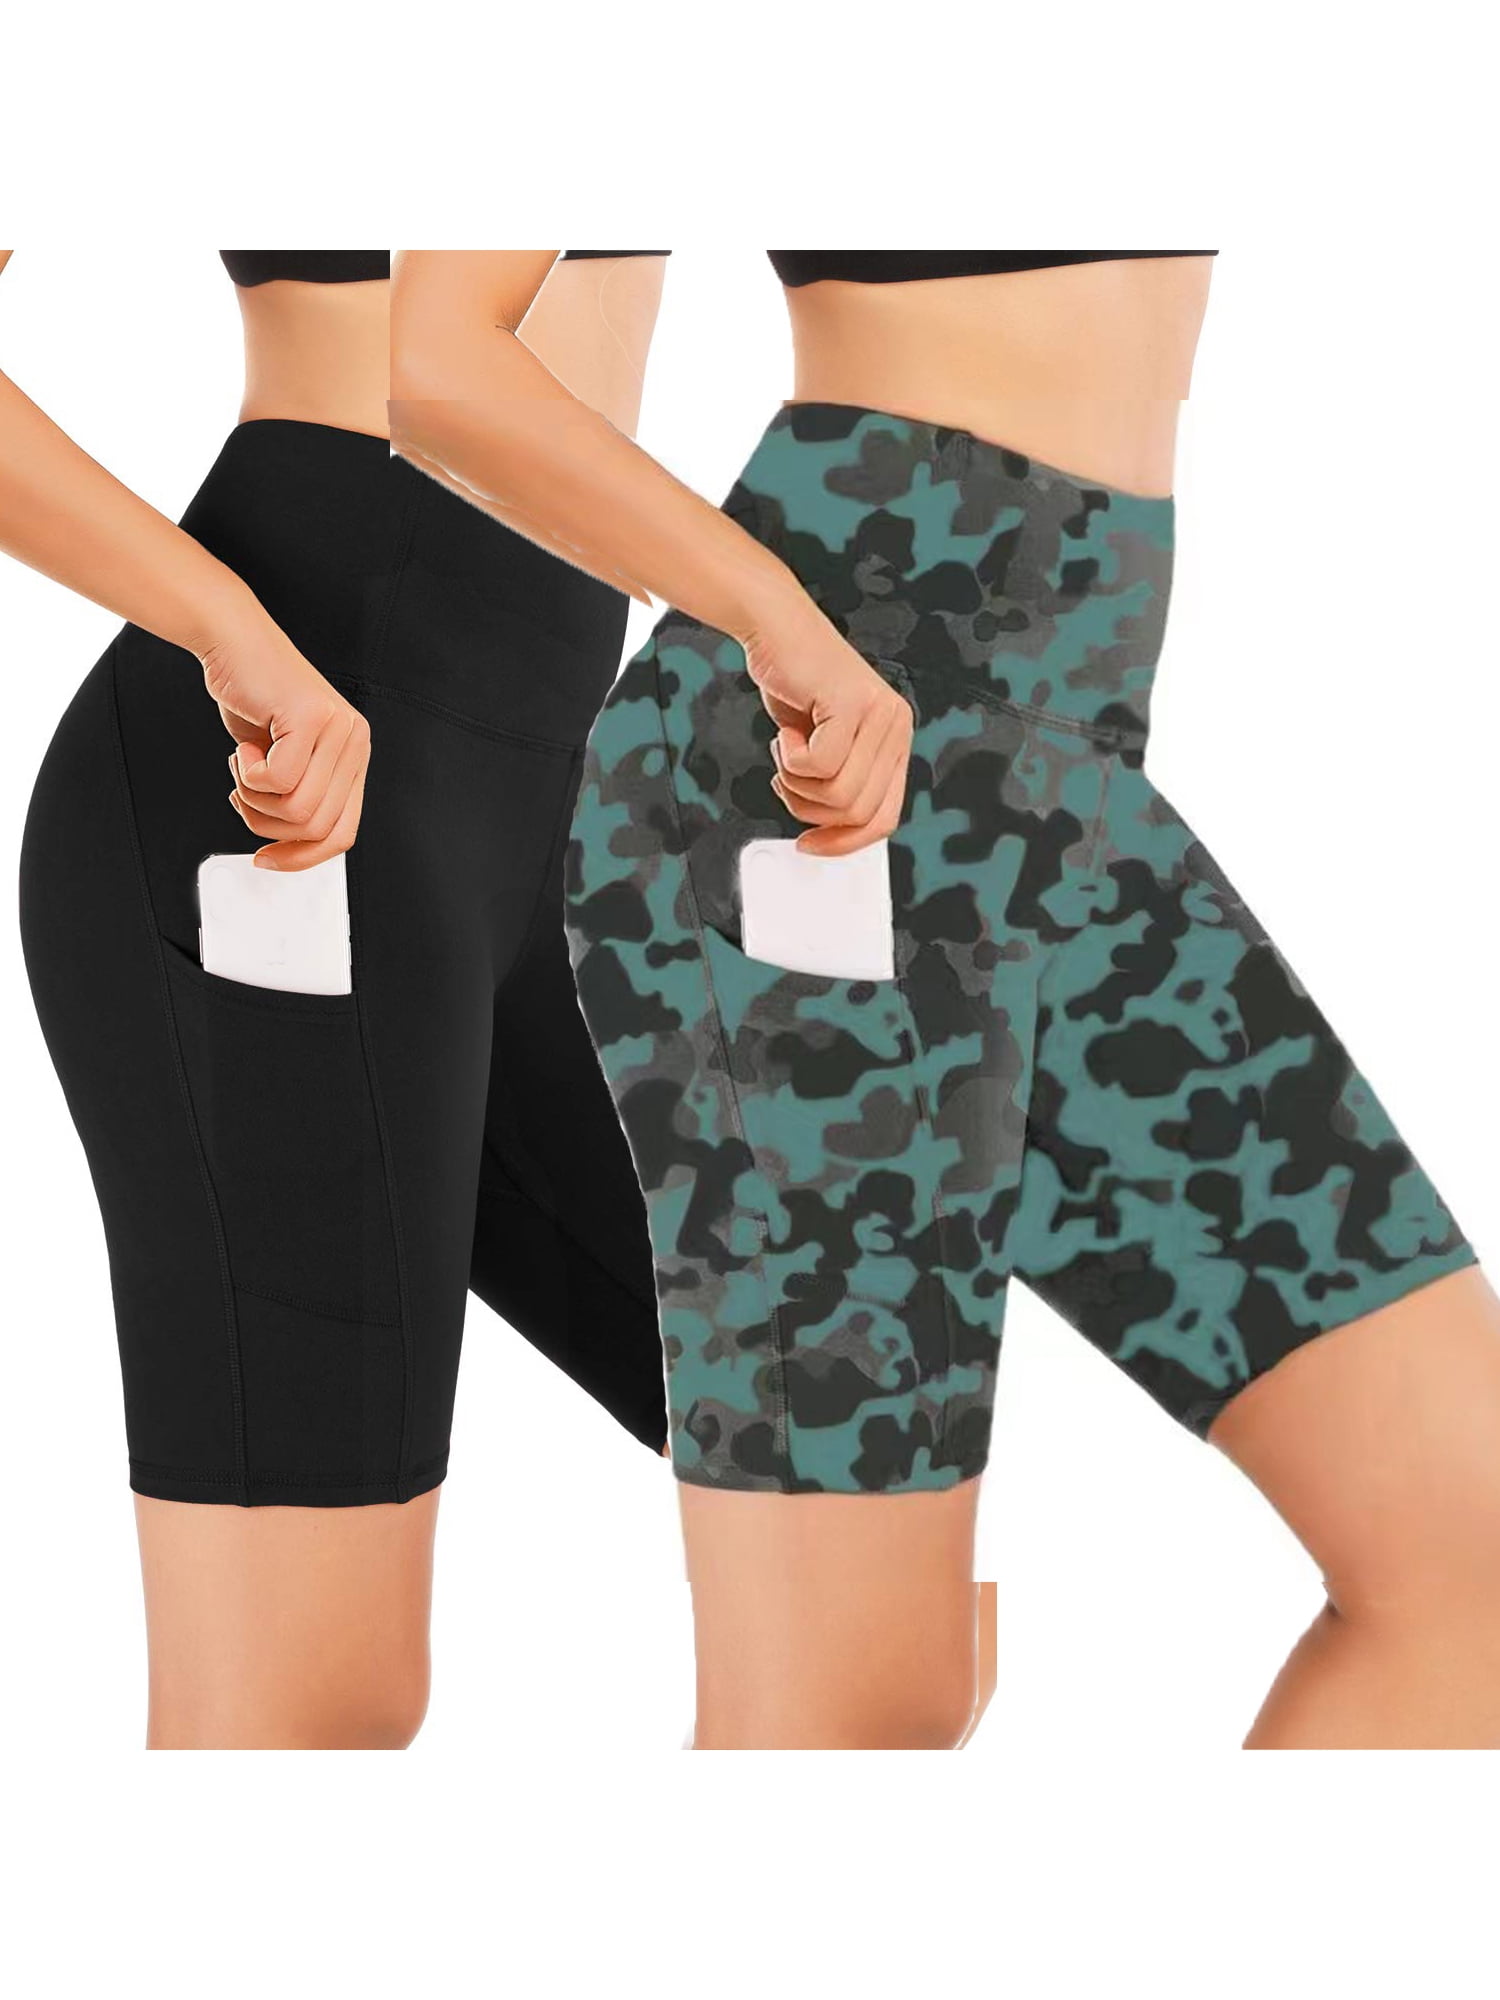 Women Girls Army Camouflage Hot Pant Pants Ladies Stretch Gym Dance Shorts Small 